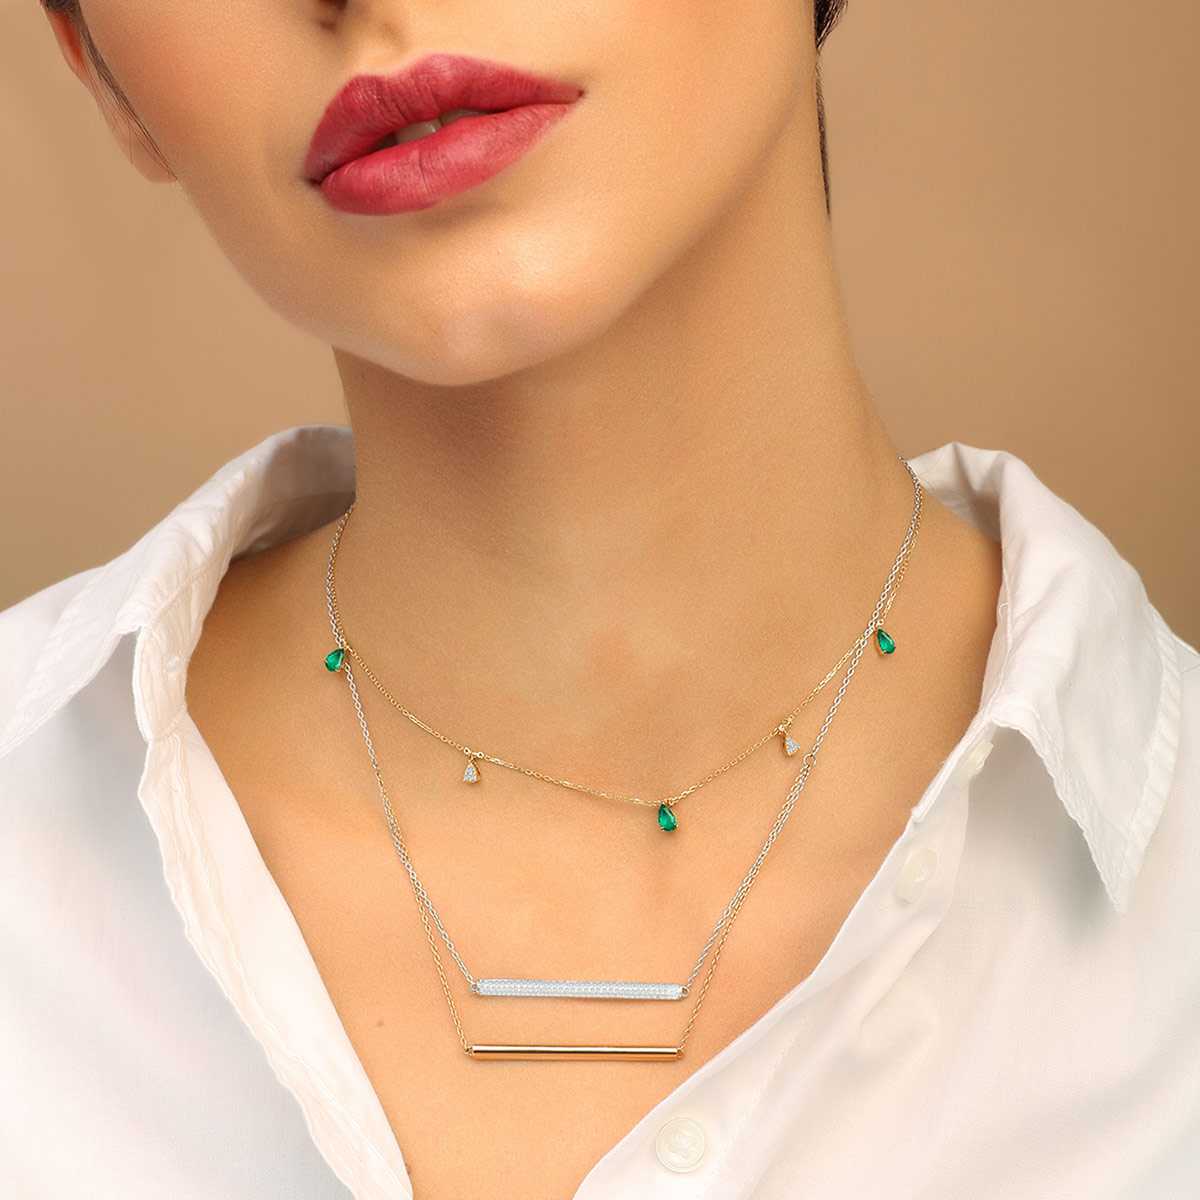 Green Tsavorite & Illusion Drop Diamond Necklace In 18 K Yellow Gold From Chokers Collection